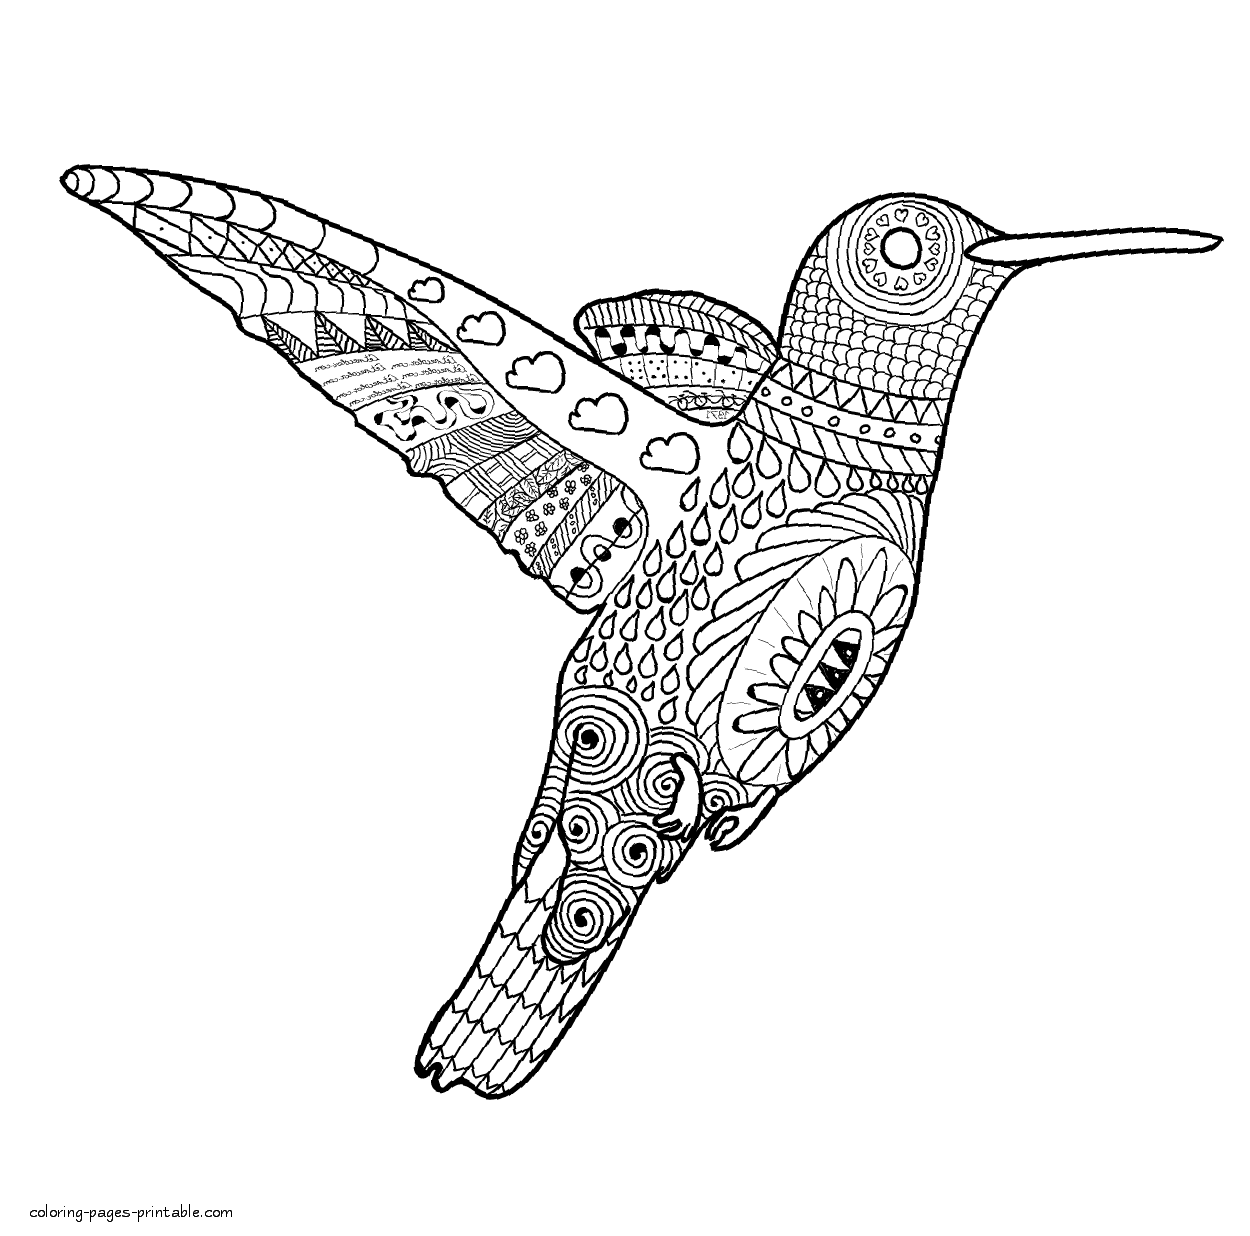 610 Printable Bird Coloring Pages For Adults Images & Pictures In HD